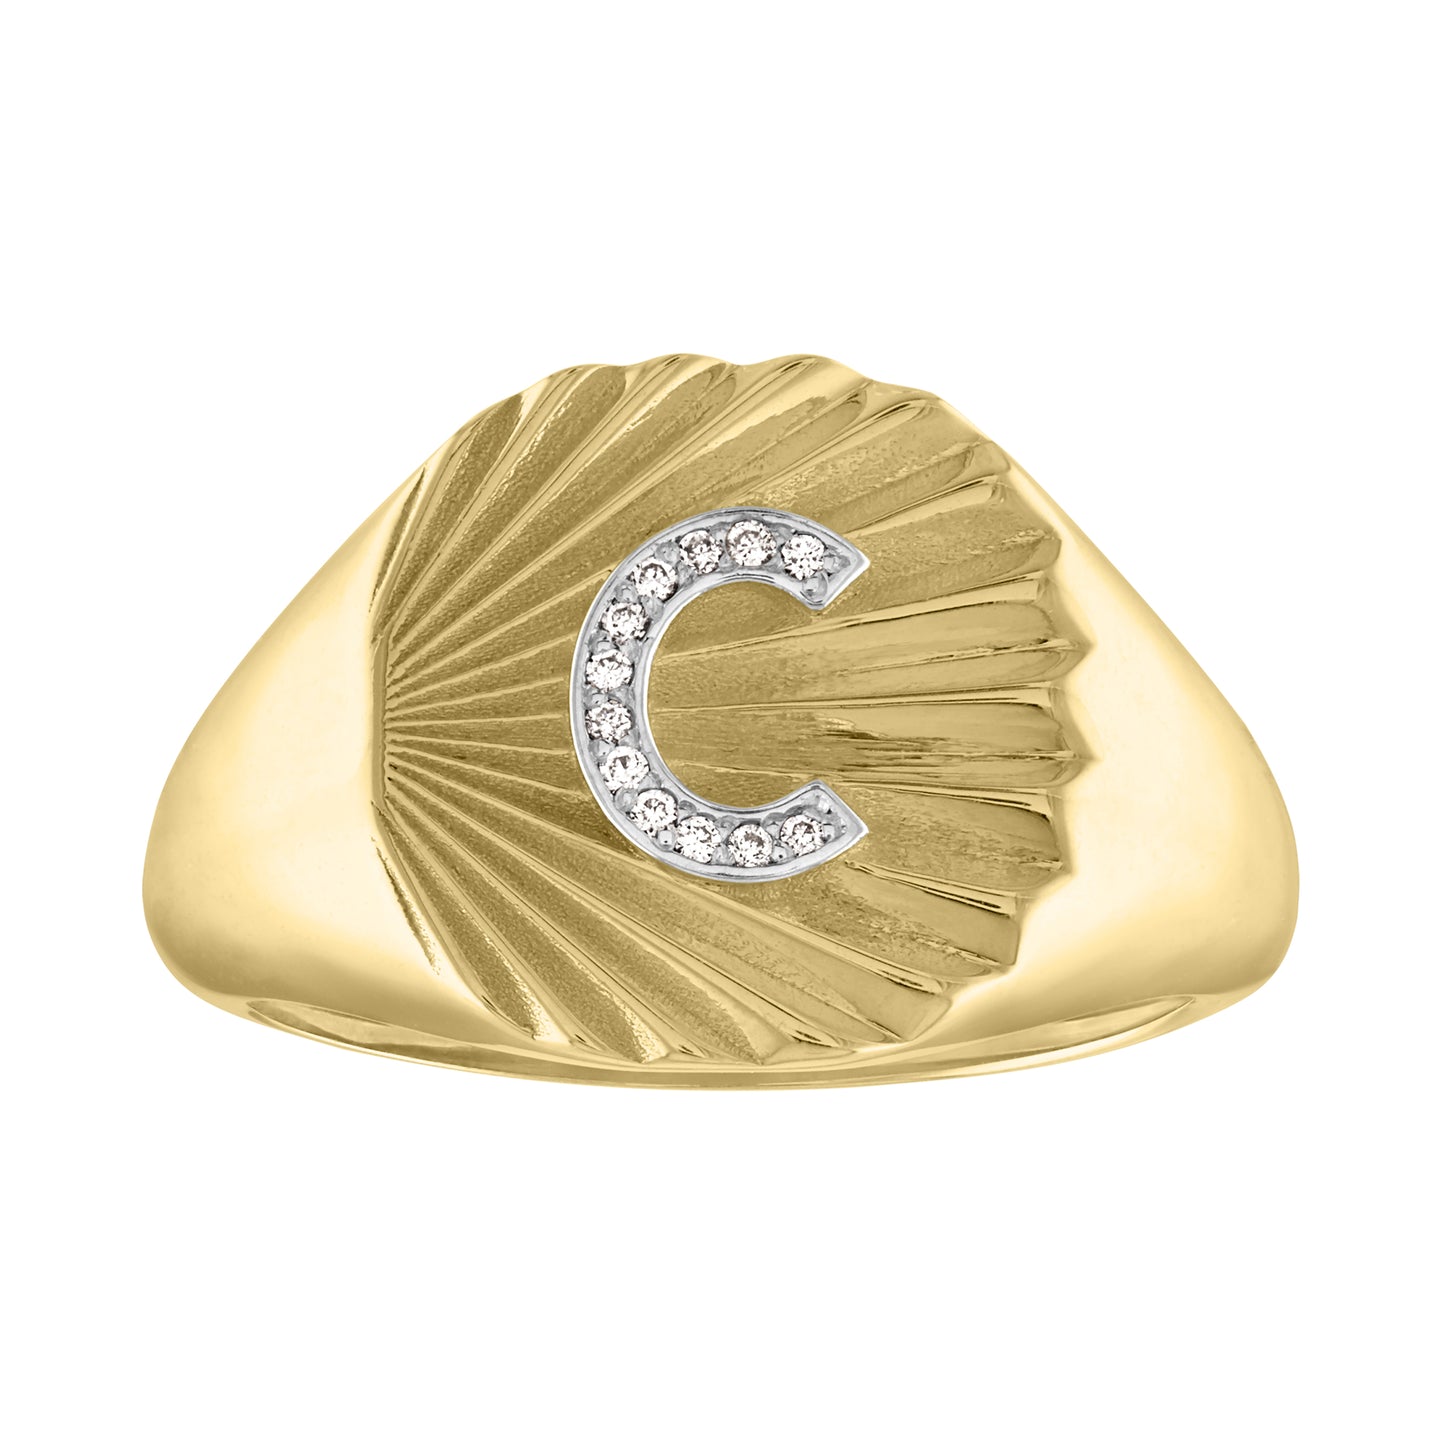 Yellow gold circle signet ring with fluting and a diamond initial in the center.